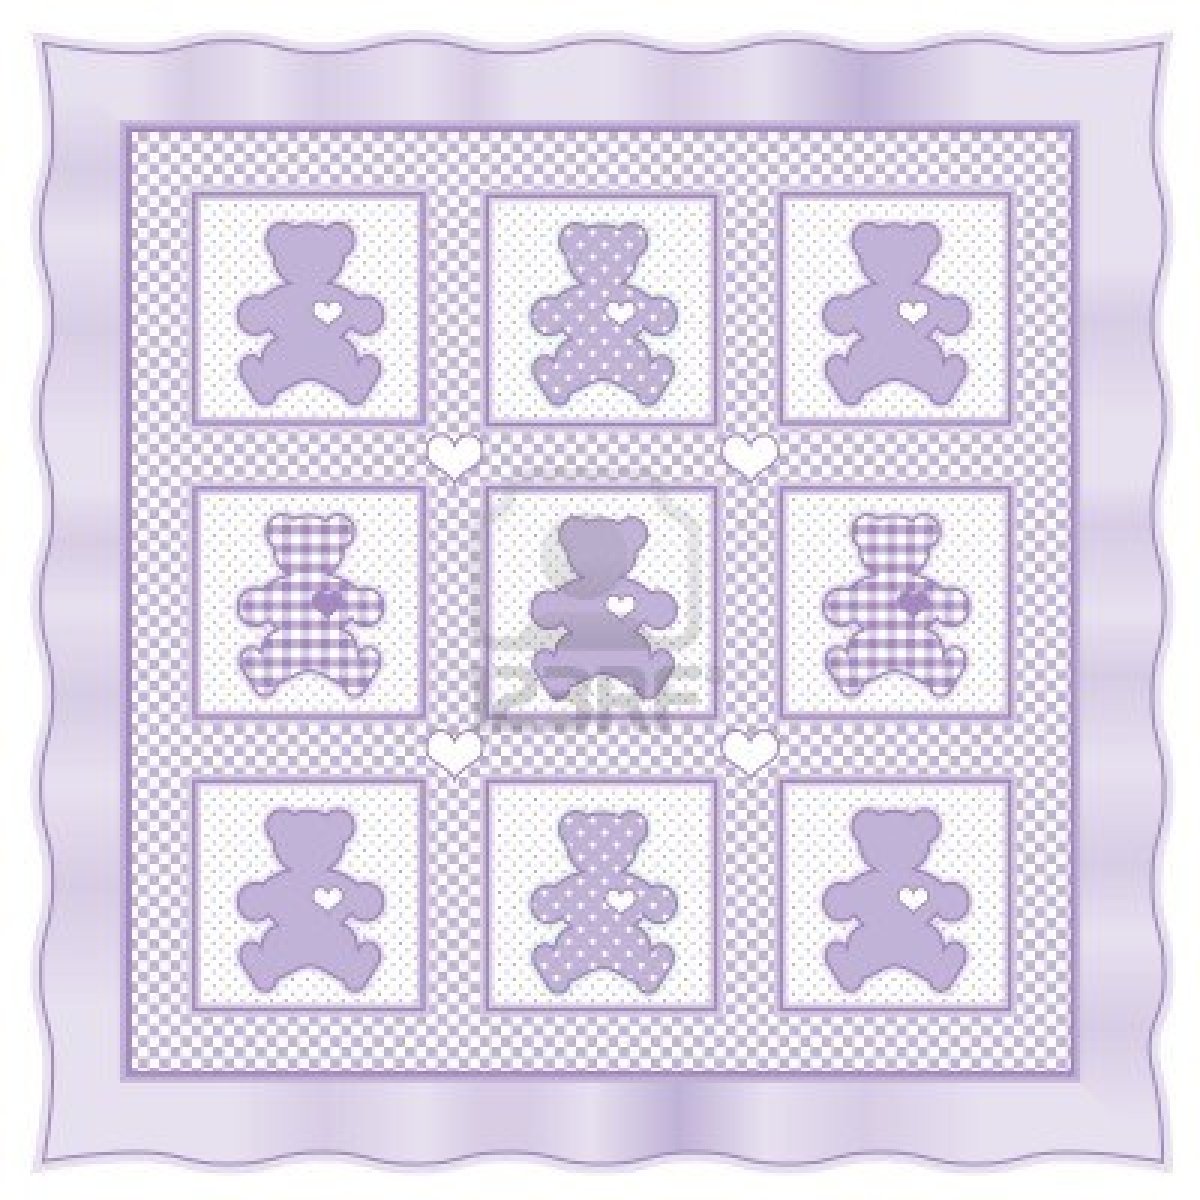 clipart of quilt - photo #40